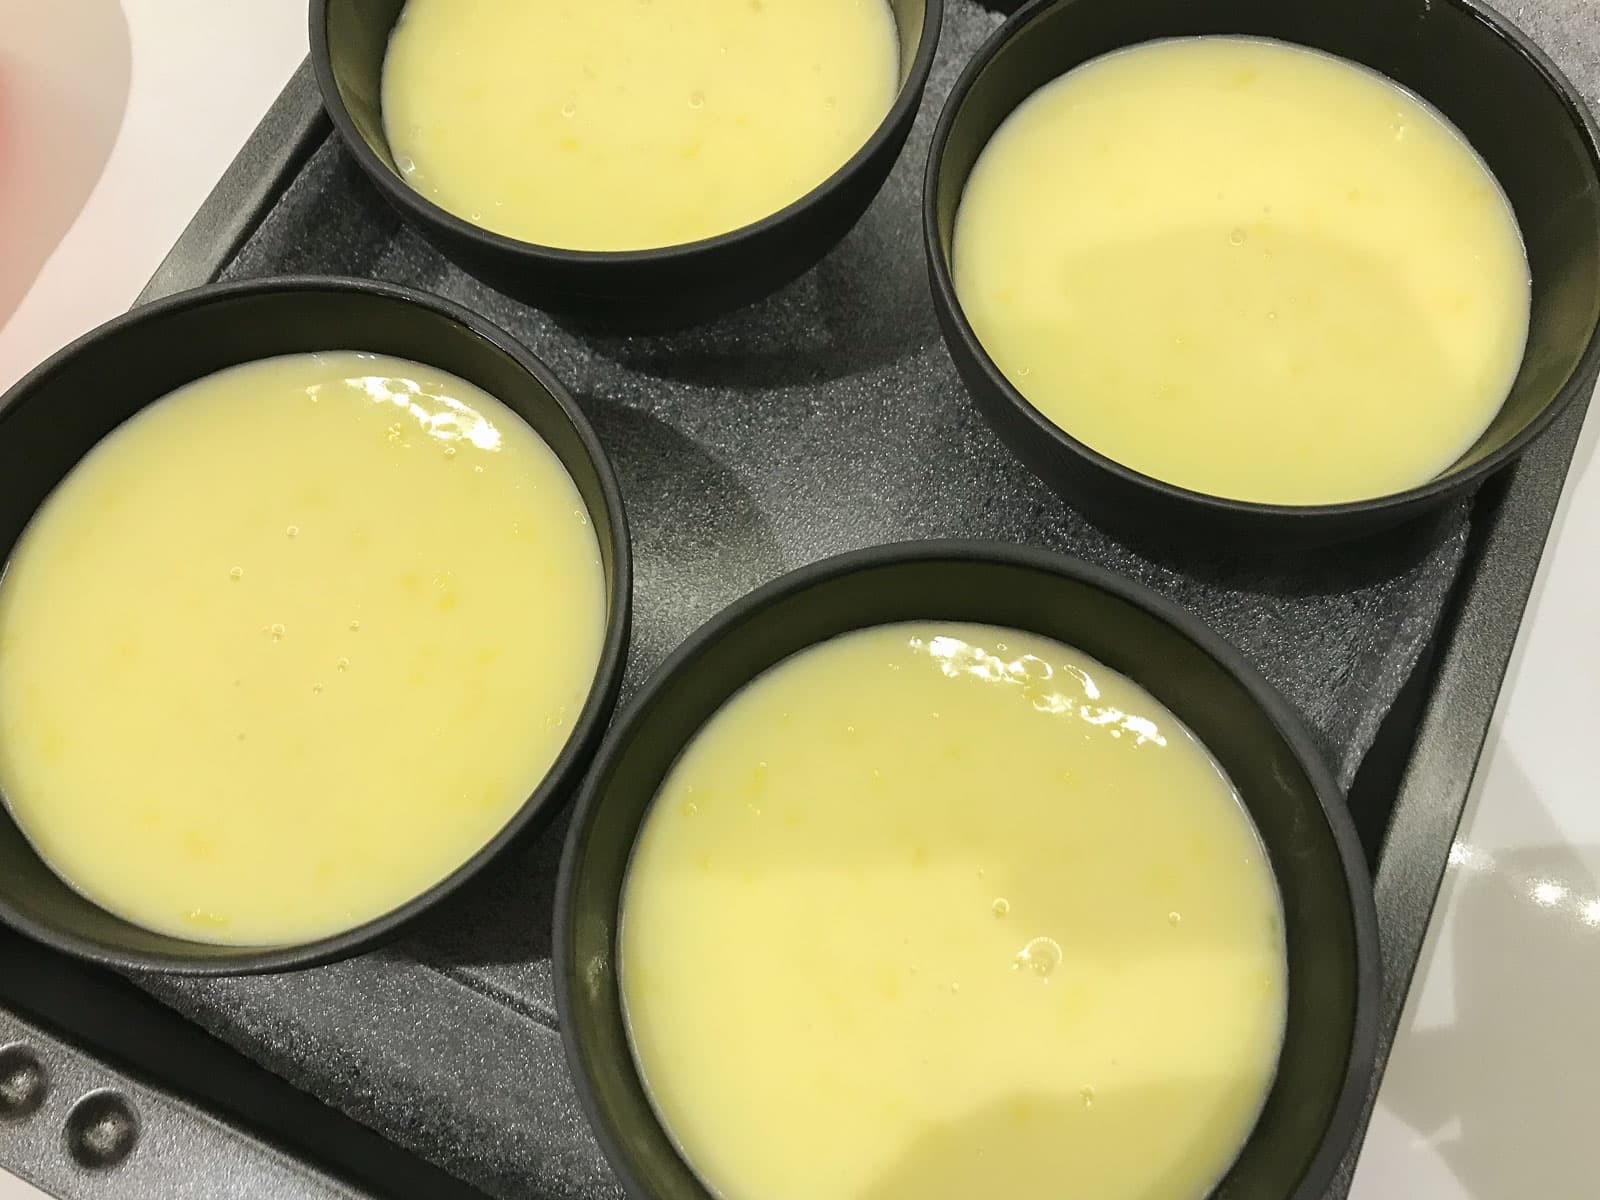 Lemon posset in small black bowls ready to be chilled.